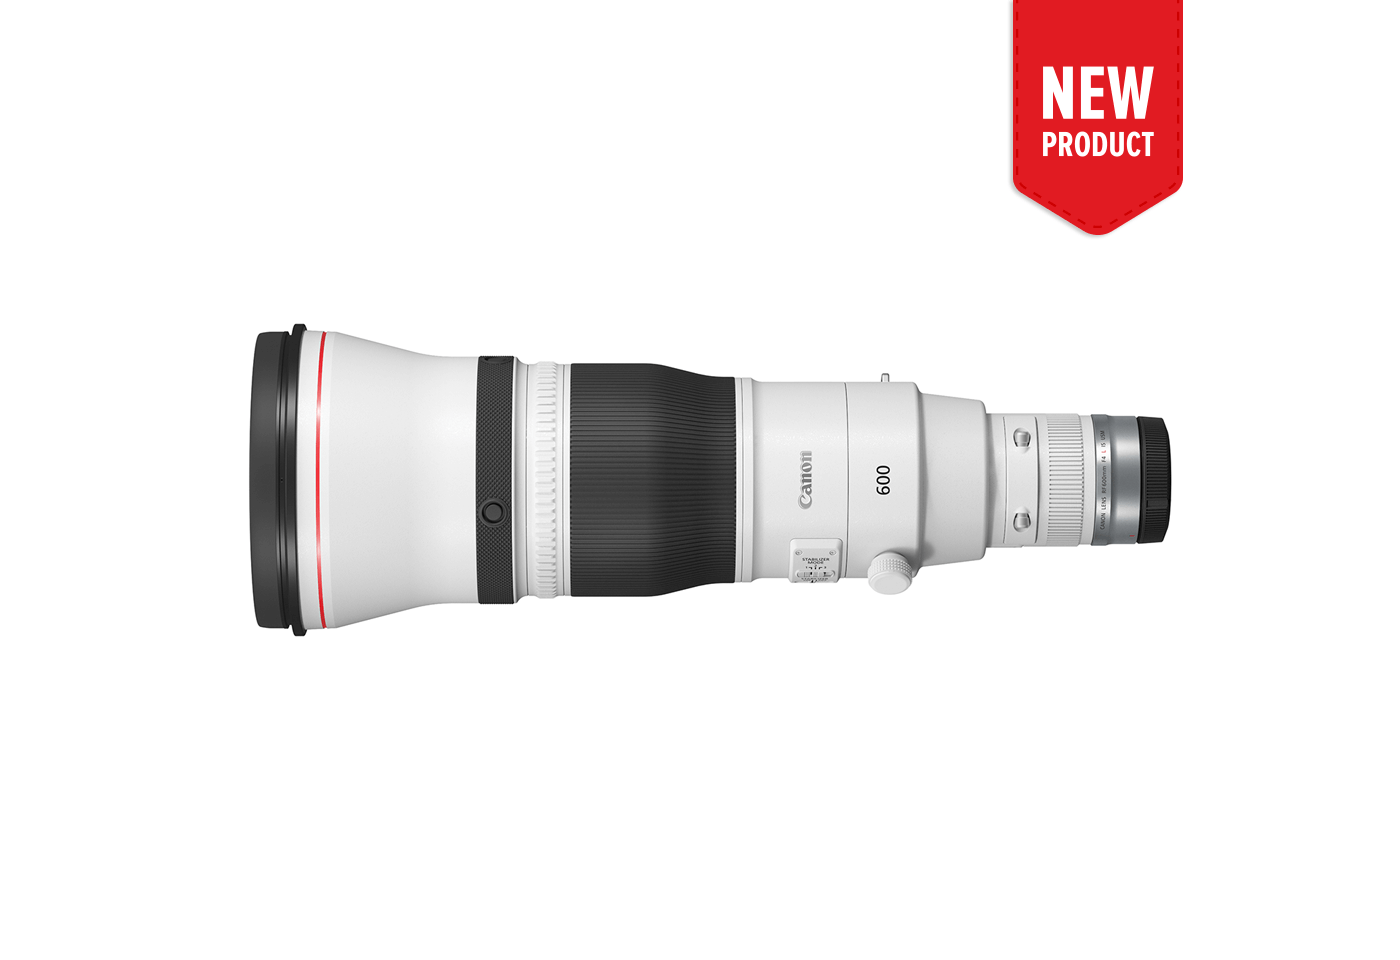 Product image of the new RF 600mm f/4 L IS USM telephoto lens